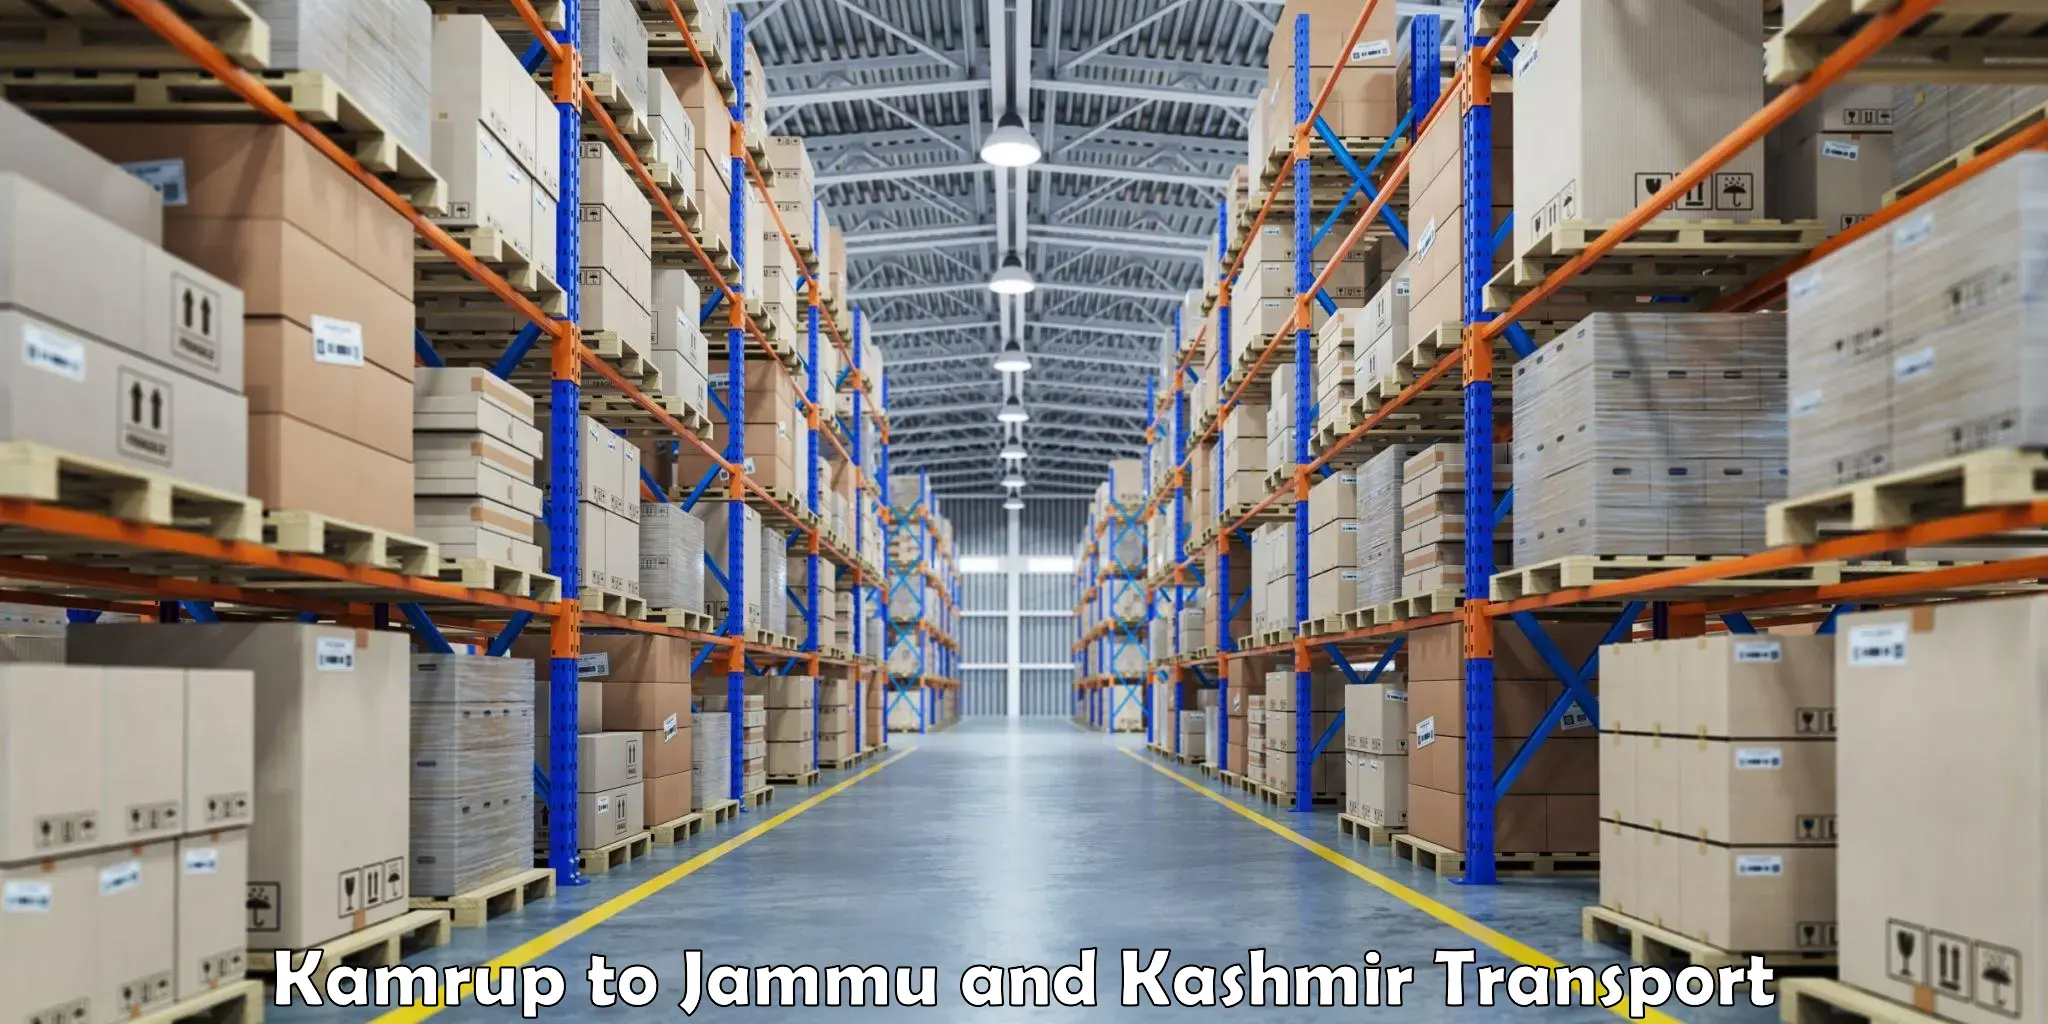 Lorry transport service Kamrup to Udhampur